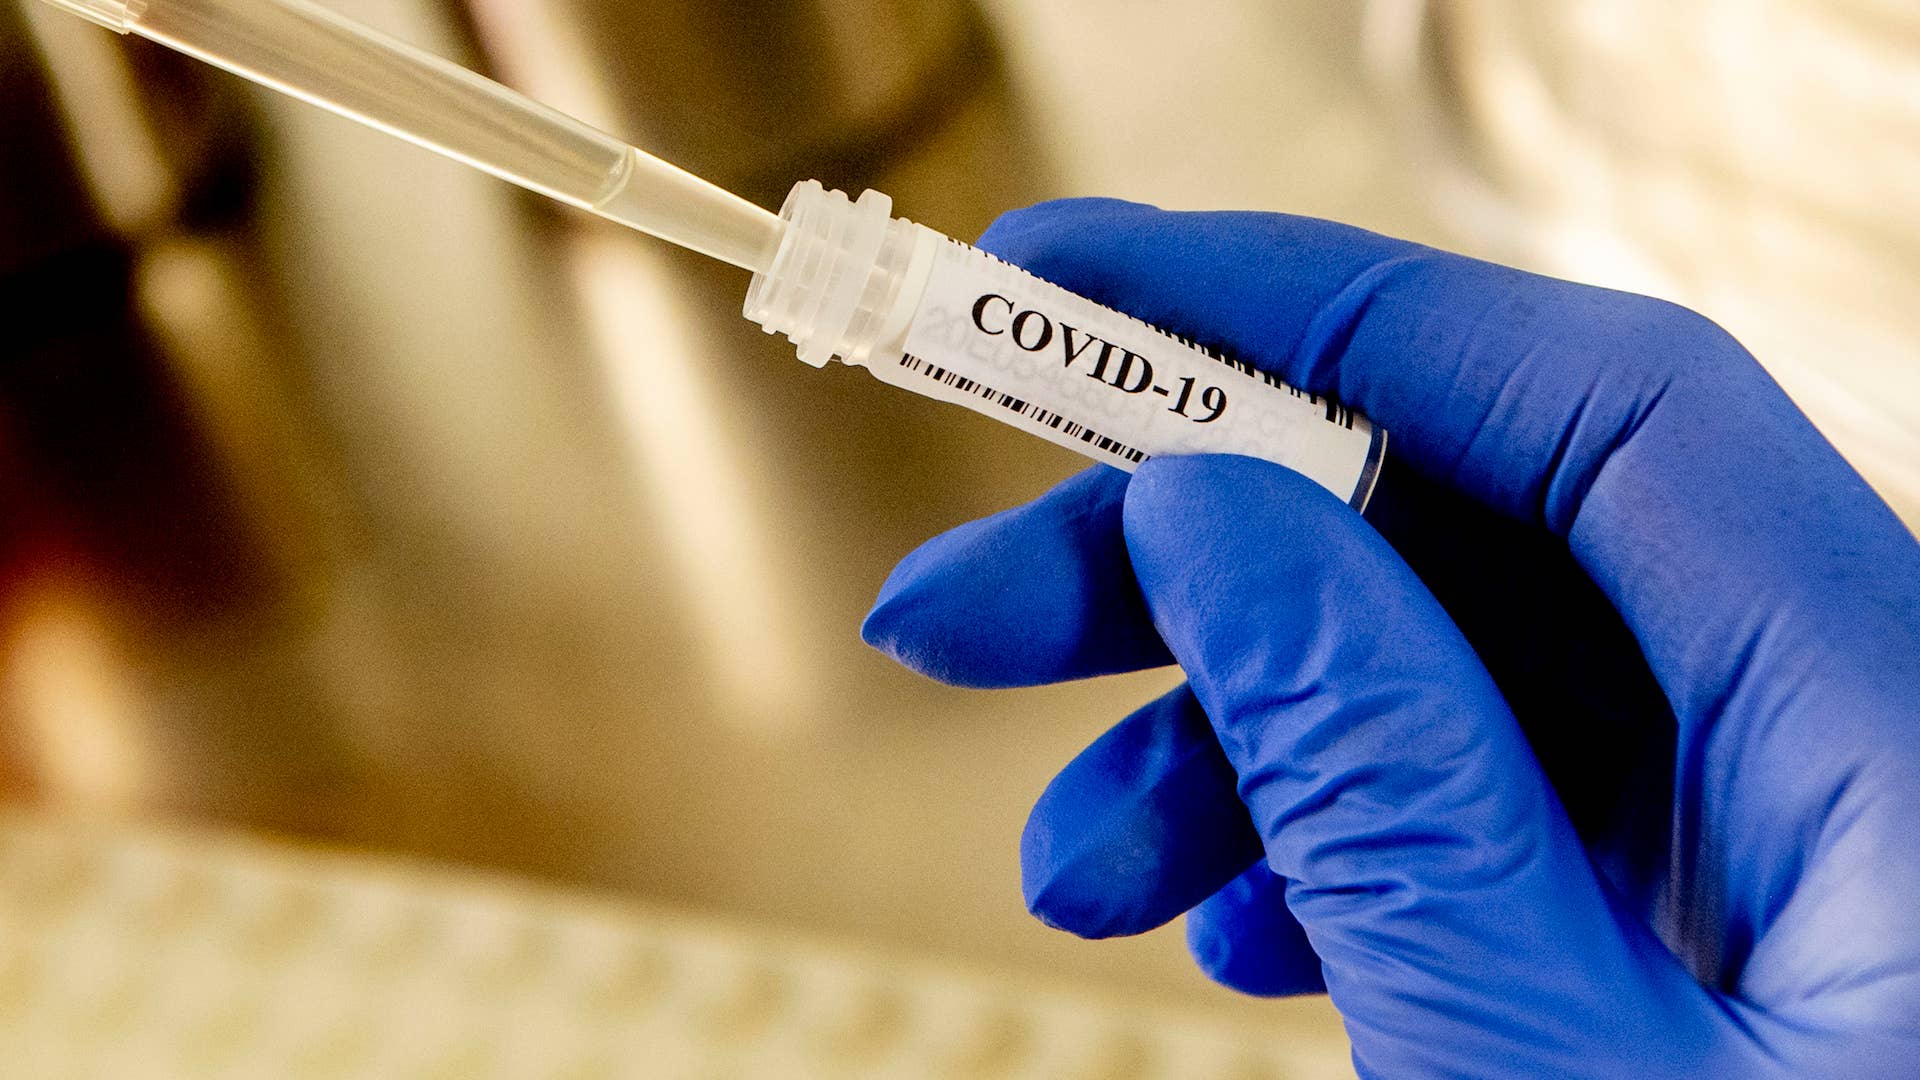 Lab technician holding blood sample test tube containing patient's positive COVID 19 test.